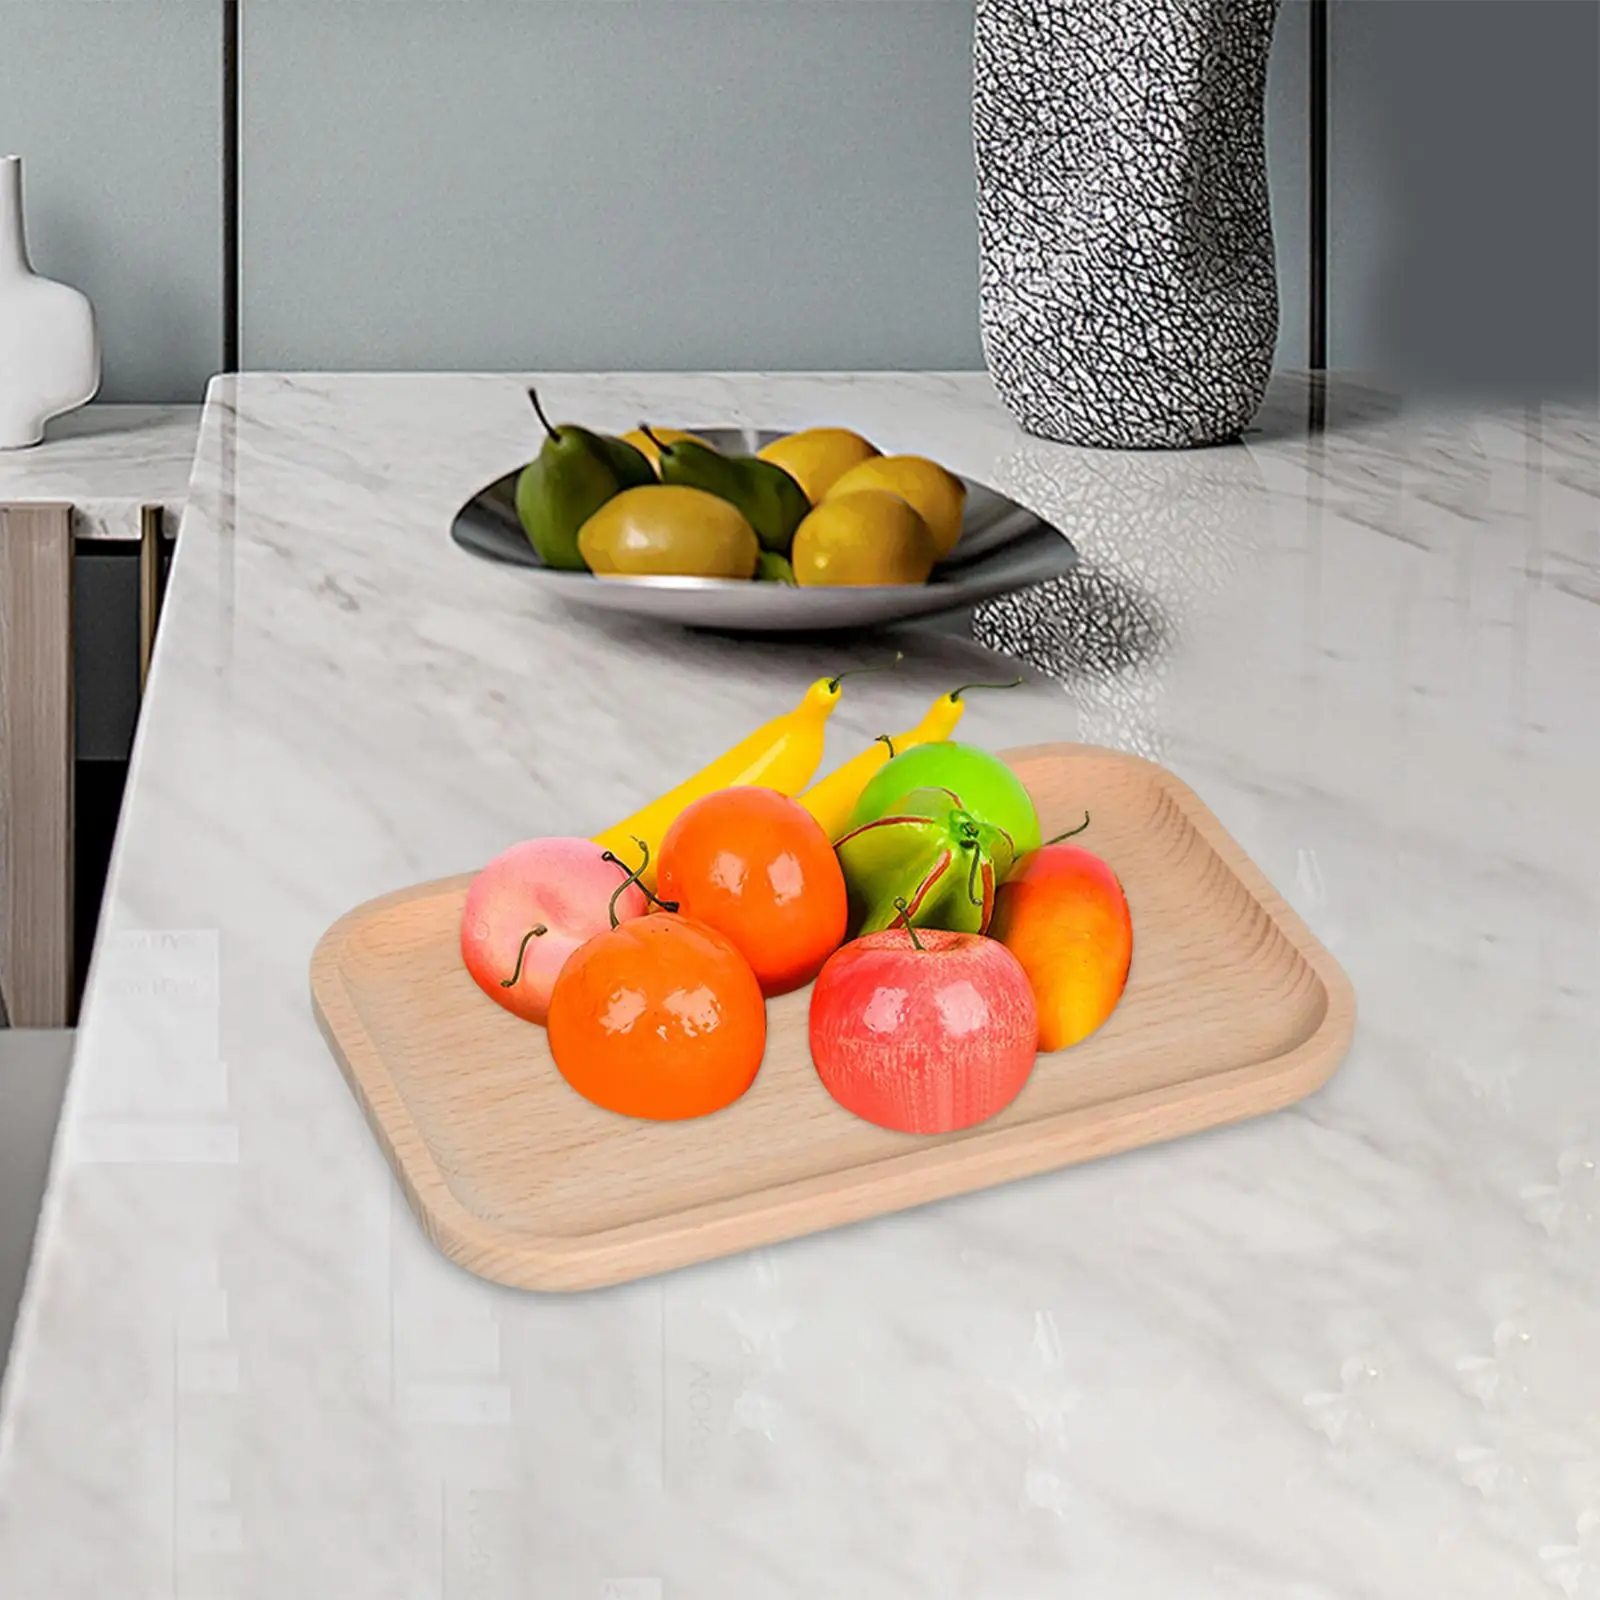 Wooden Serving Tray Home Food Tray for Restaurant Countertop Bedroom